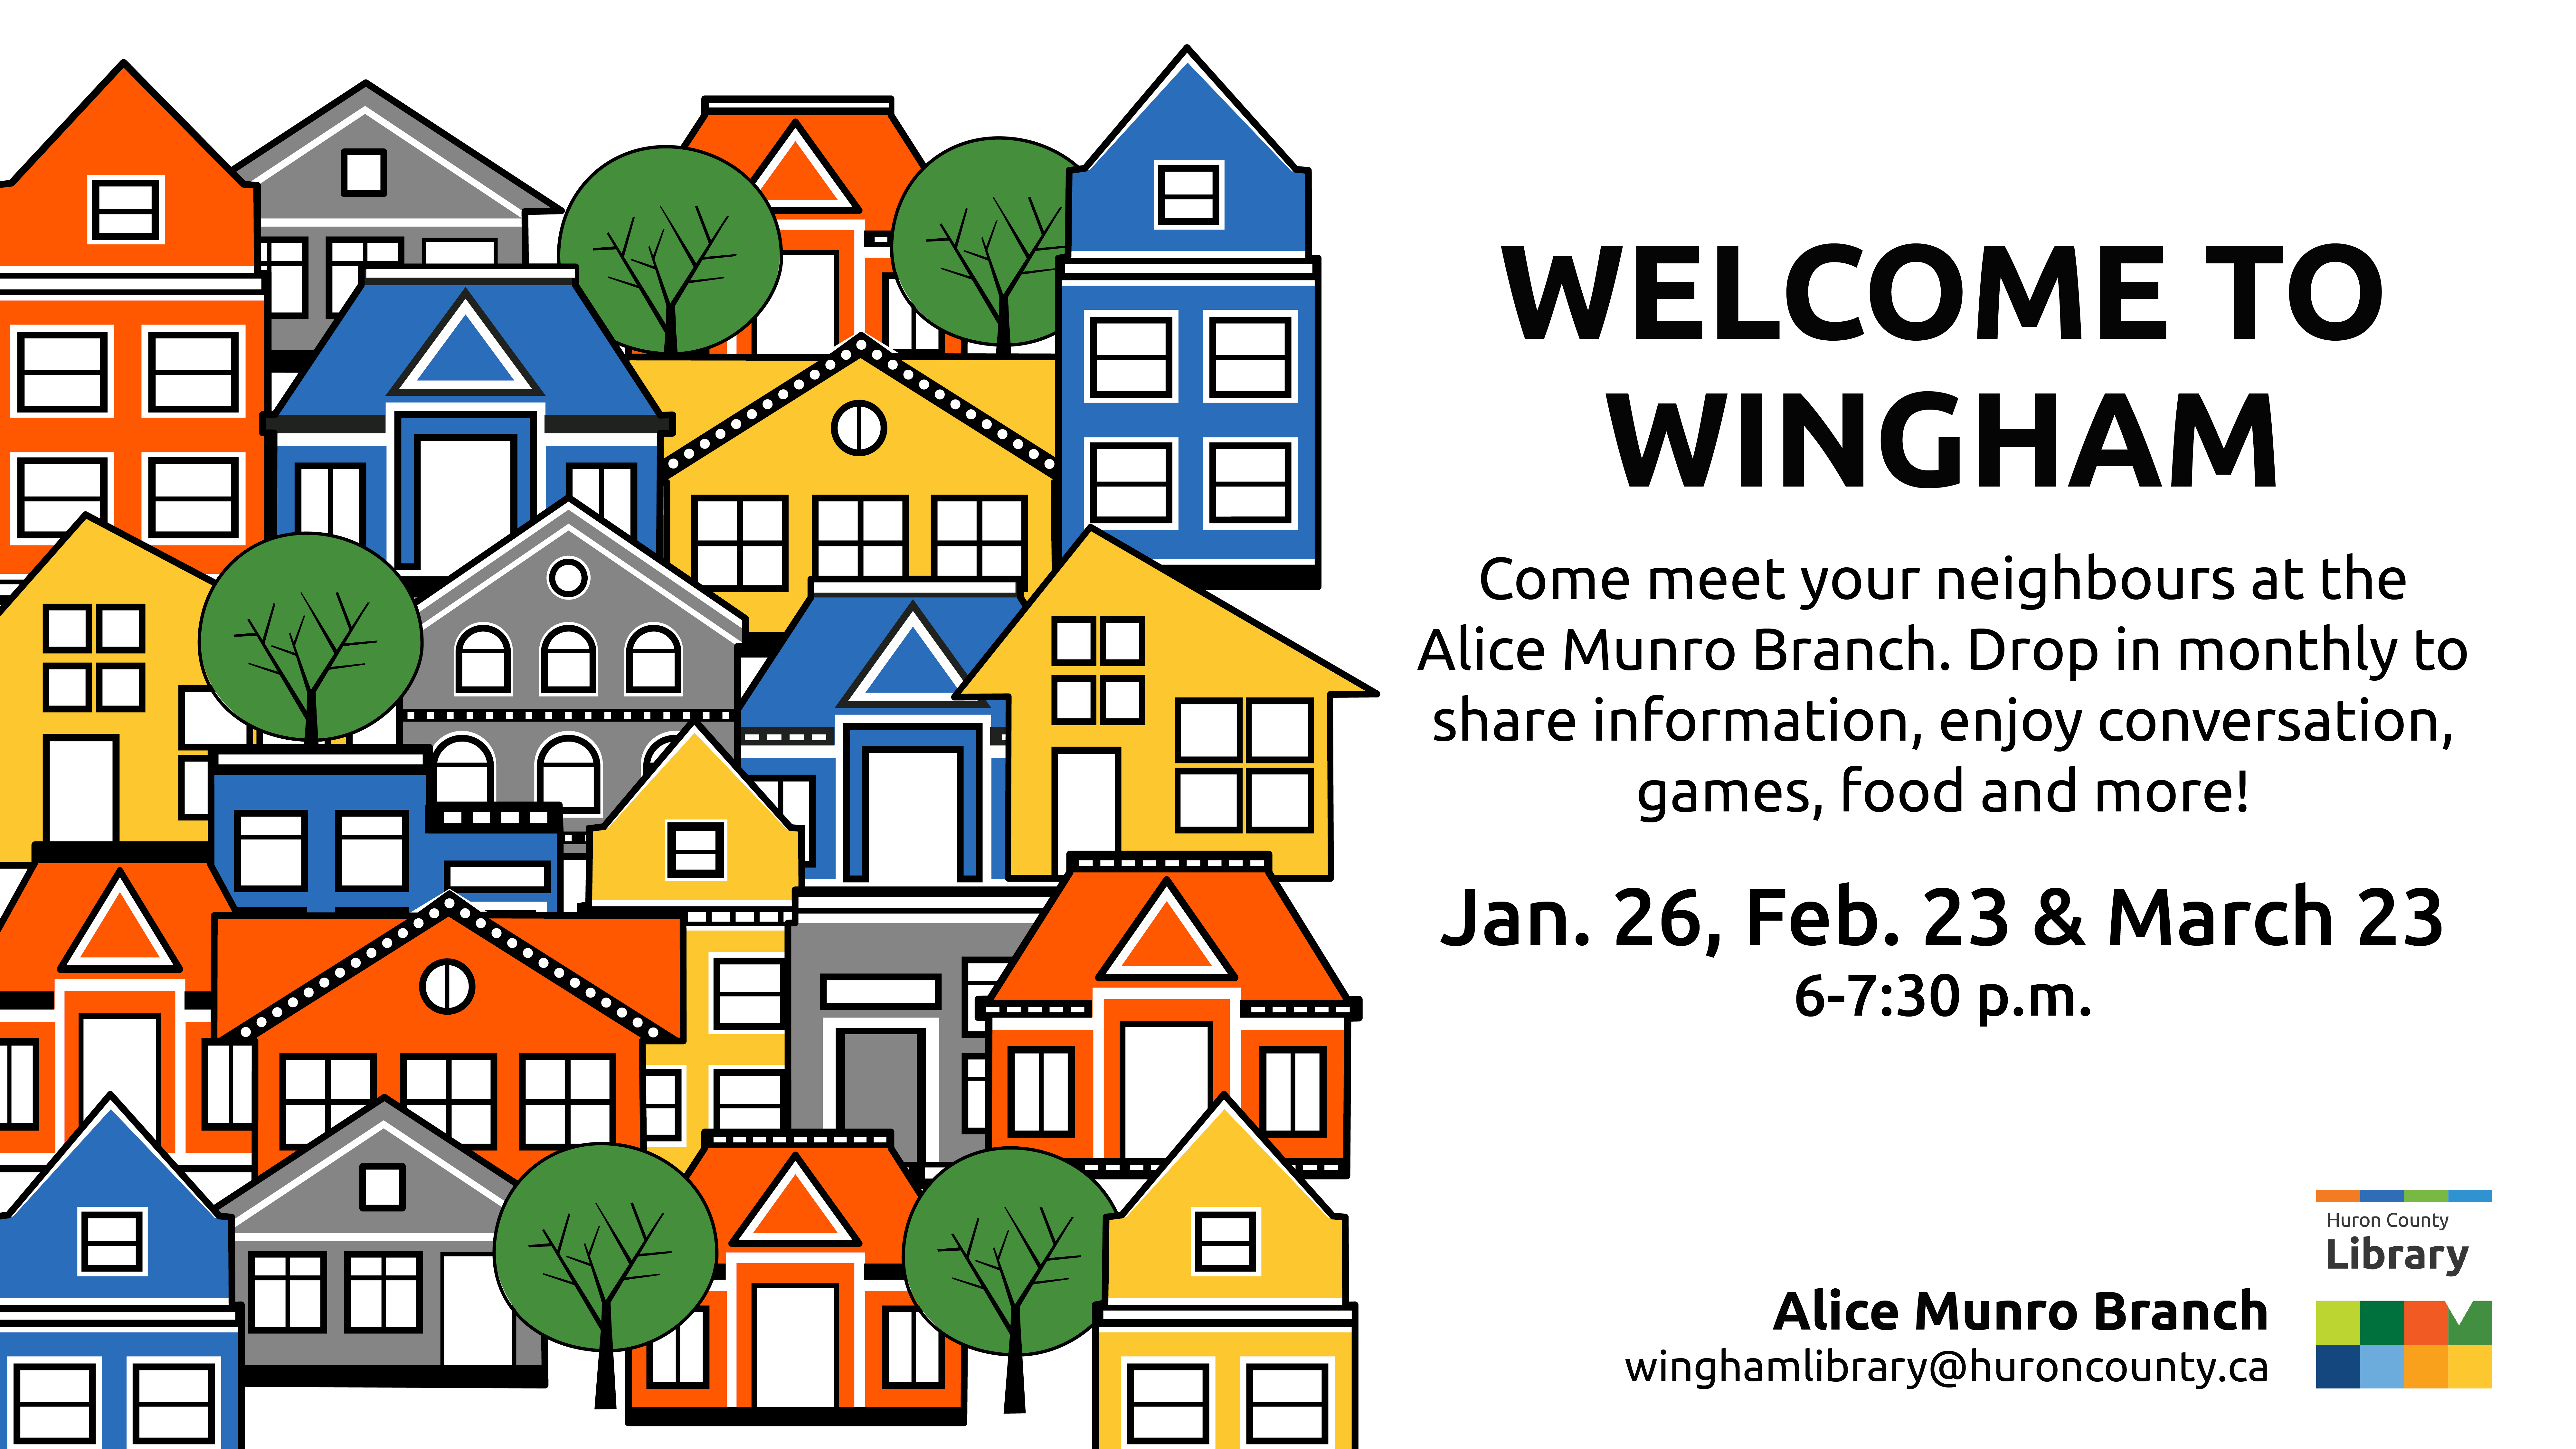 Illustration of a houses in a neighbourhood with text promoting Welcome to Wingham program